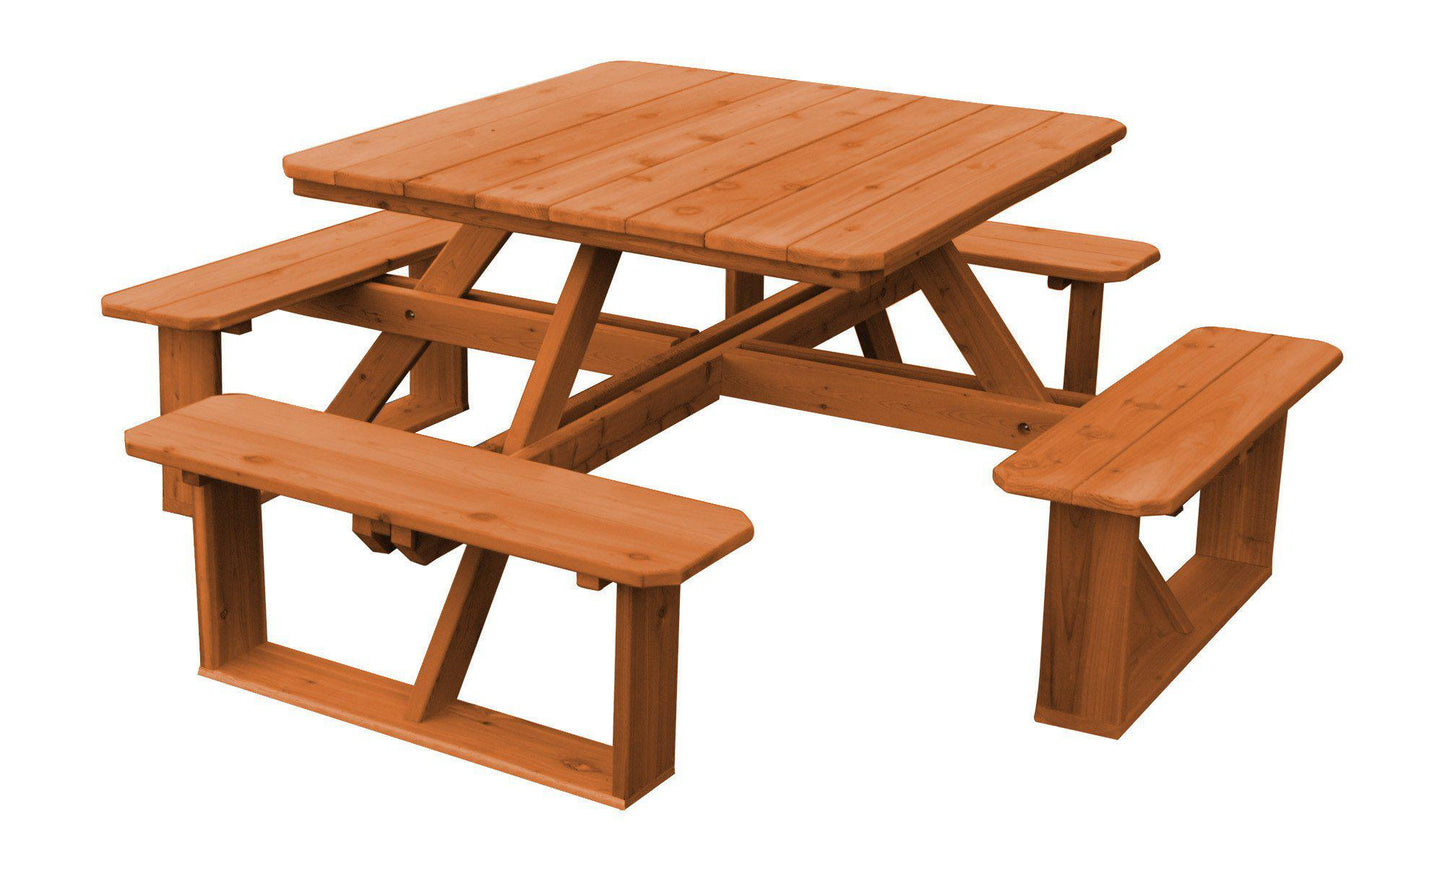 A&L FURNITURE CO. Western Red Cedar 44"  Square Walk-In Table- Specify for FREE 2" Umbrella Hole - LEAD TIME TO SHIP 4 WEEKS OR LESS